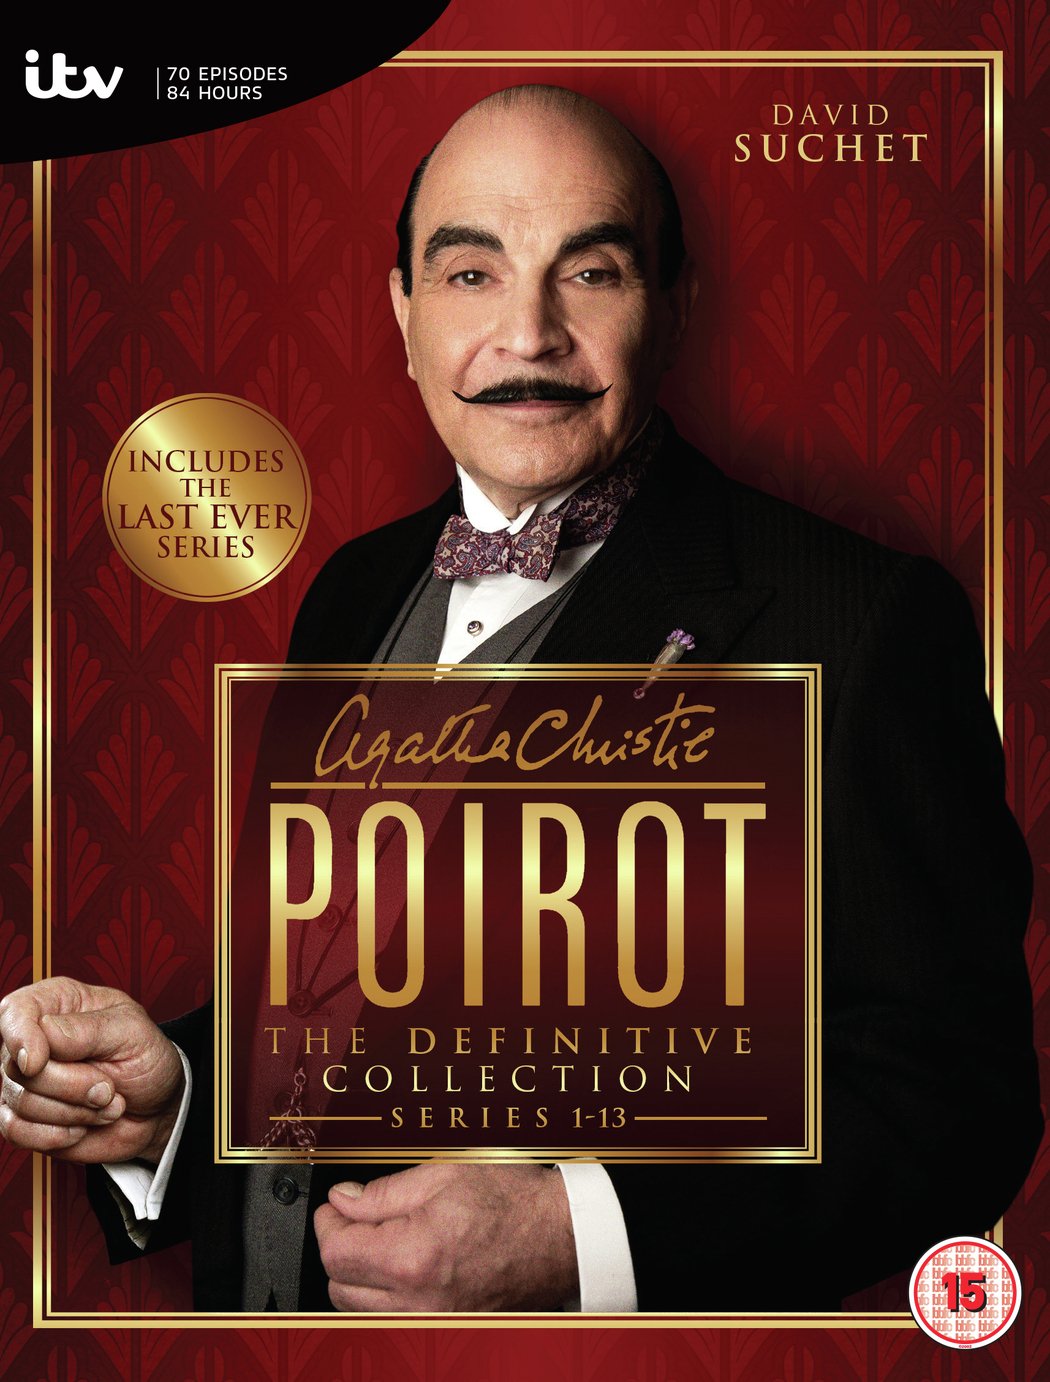 Poirot: The Definitive Collection DVD Box Set Review